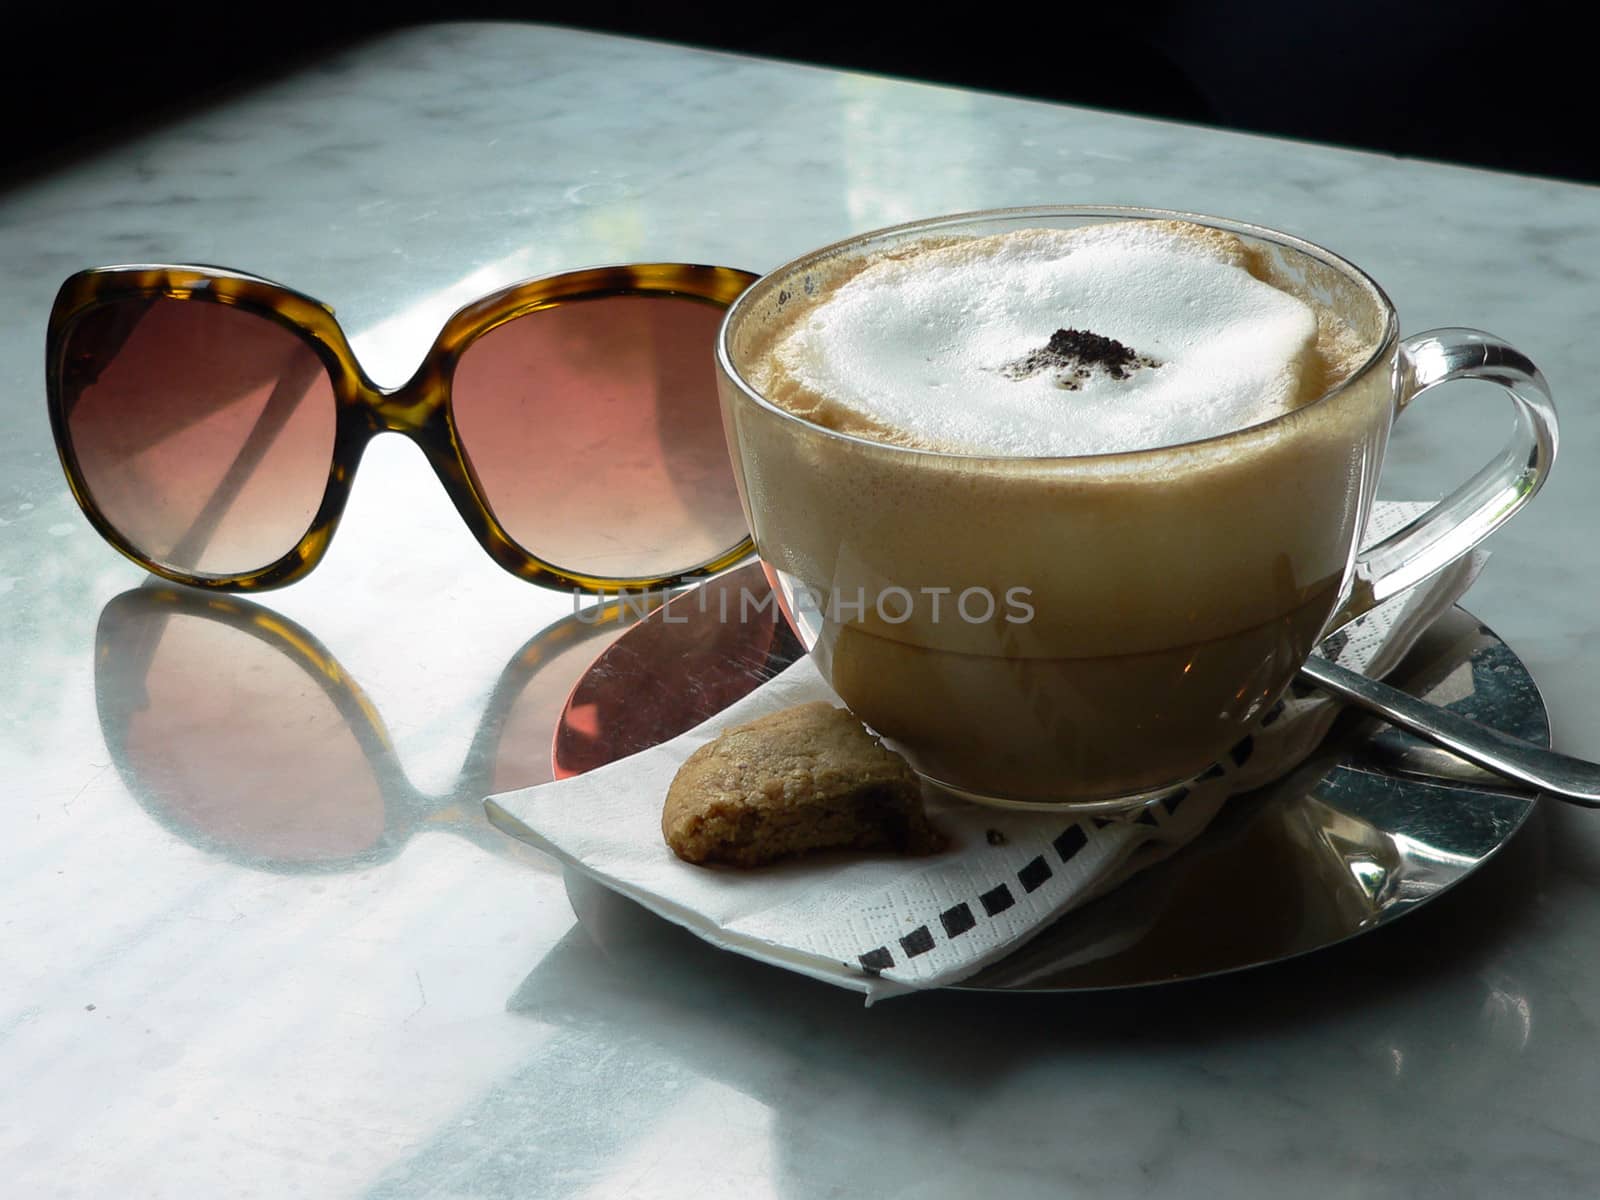 Cup of cappuccino coffee, biscuit and sunglasses